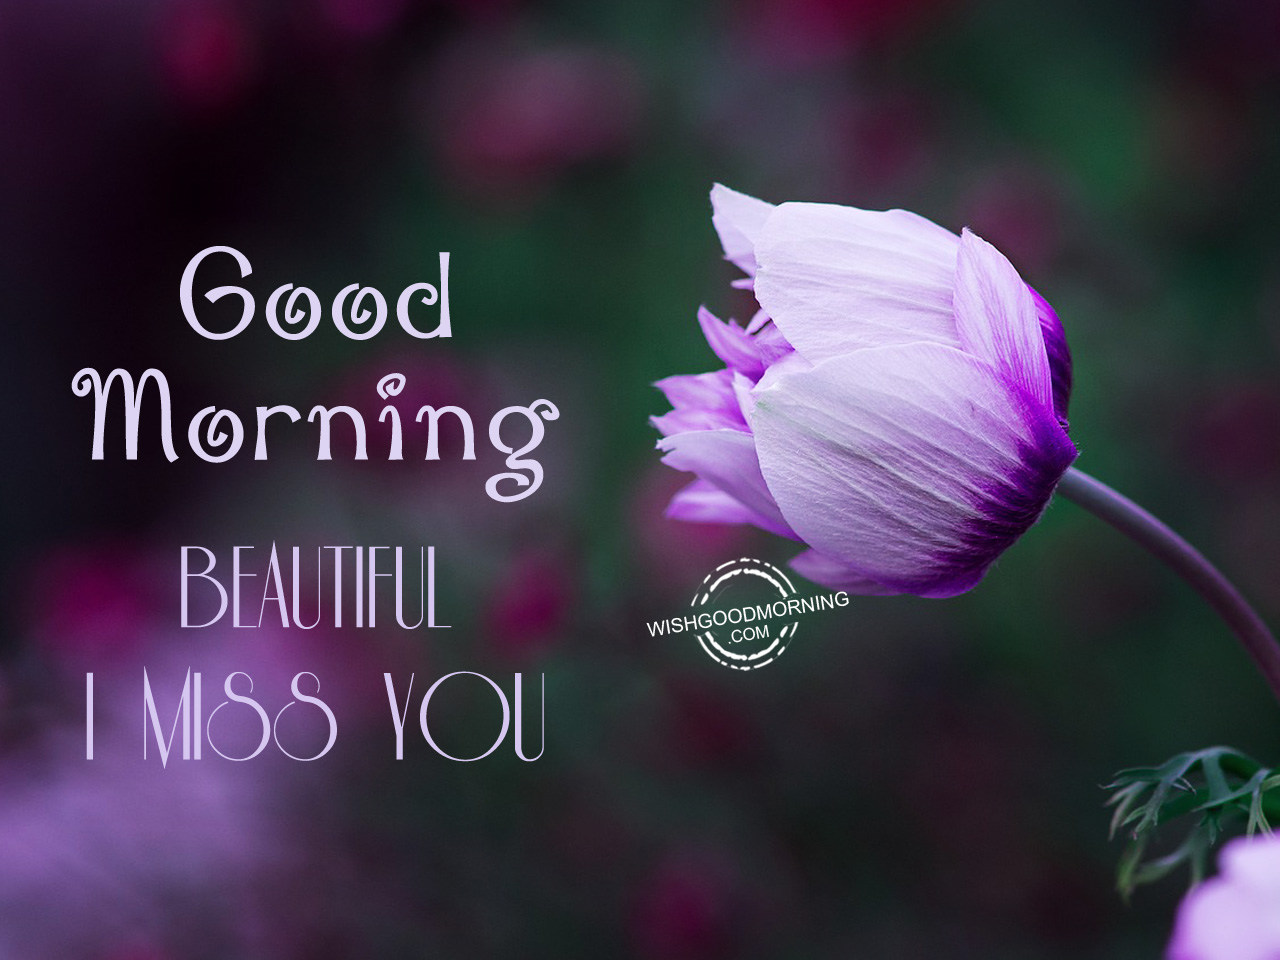 Beautiful I Miss You - Good Morning Image For Gf - HD Wallpaper 